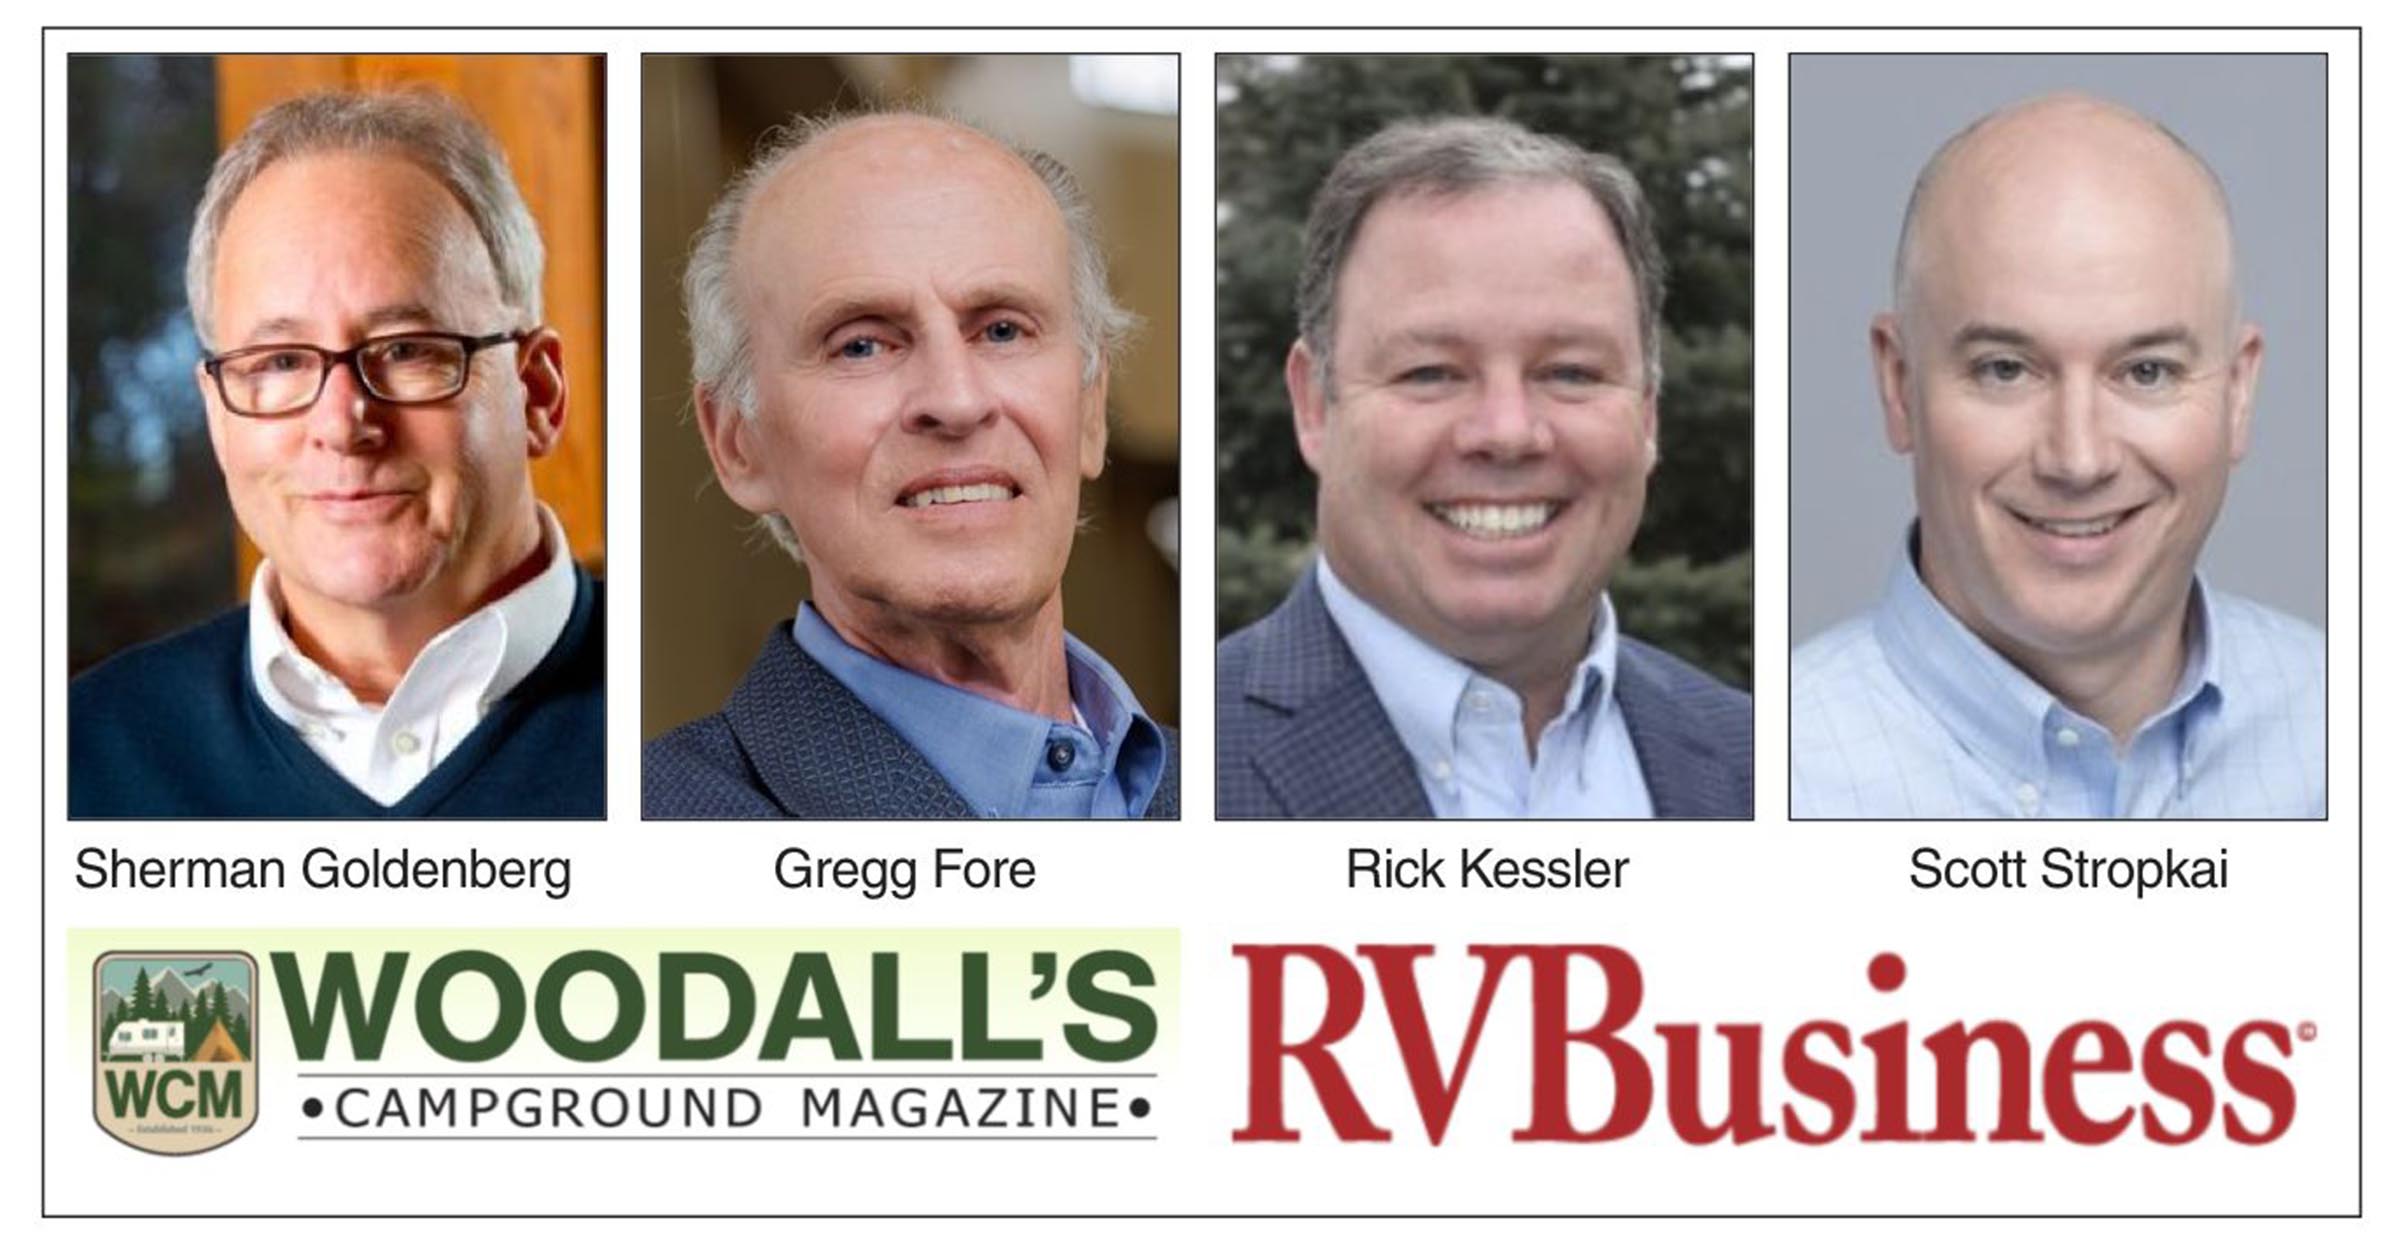 A Major Transition for RVBusiness & Woodall’s Magazines